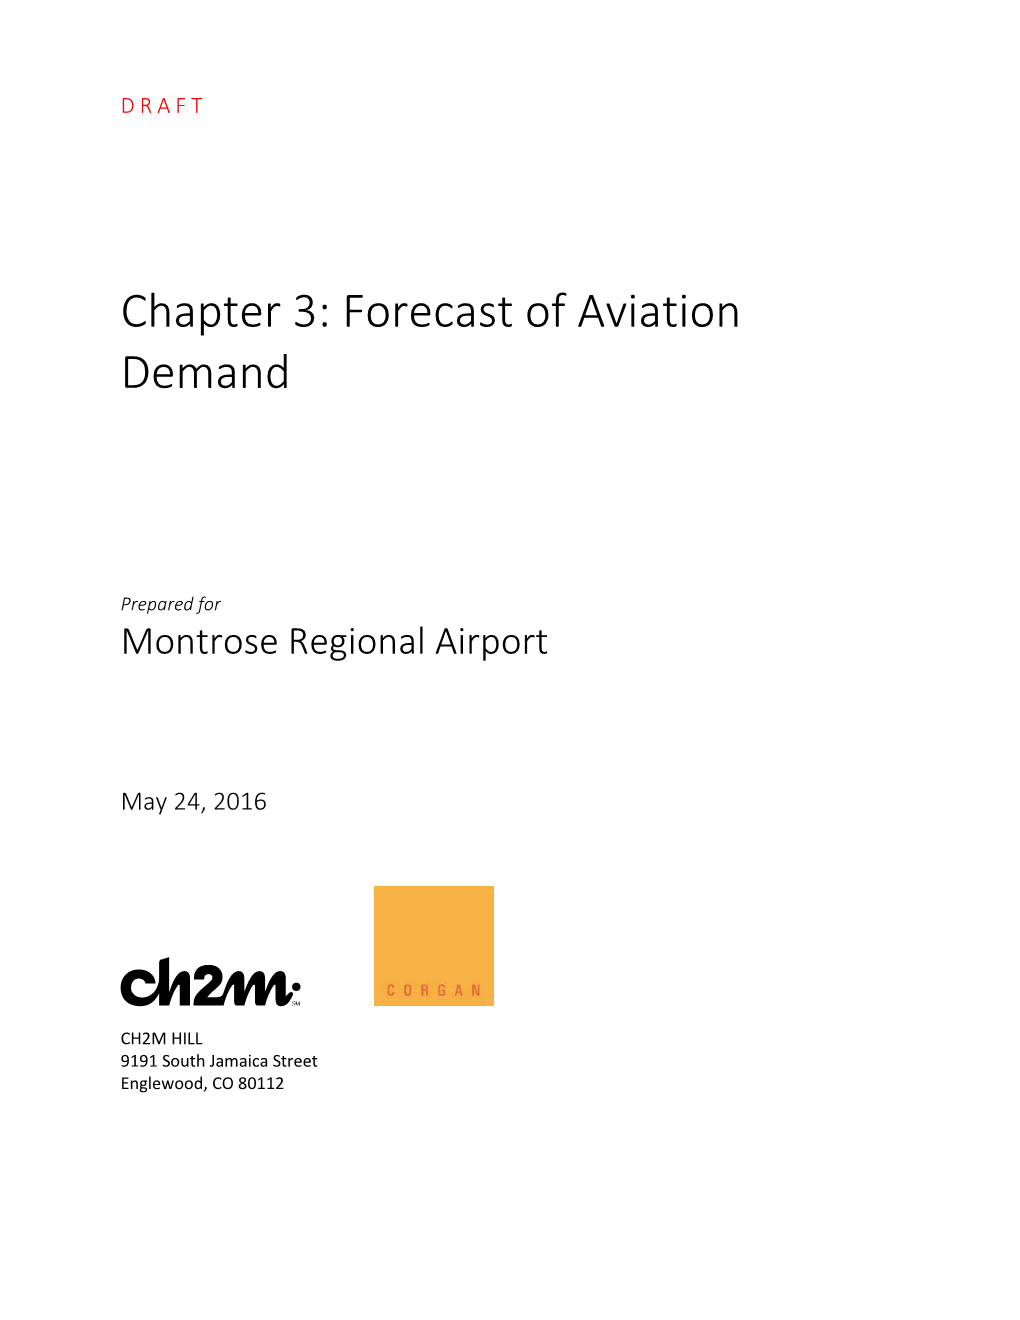 Chapter 3: Forecast of Aviation Demand